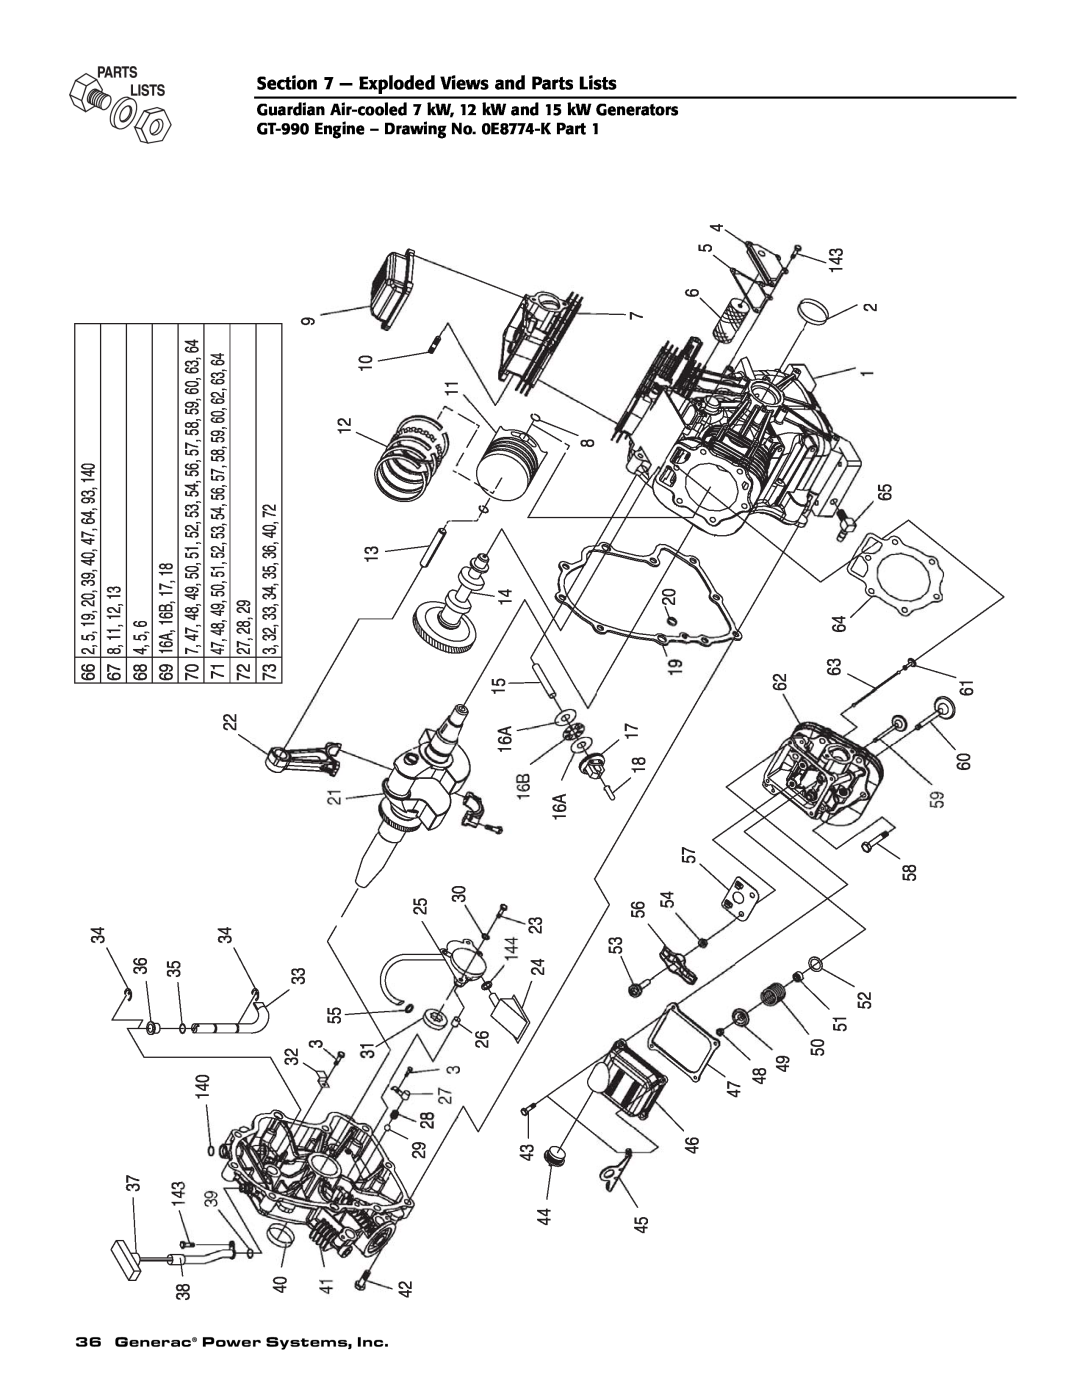 Guardian Technologies 04758-2, 04759-2, 04760-2 Exploded Views and Parts Lists, GT-990 Engine - Drawing No, 0E8774-K Part 